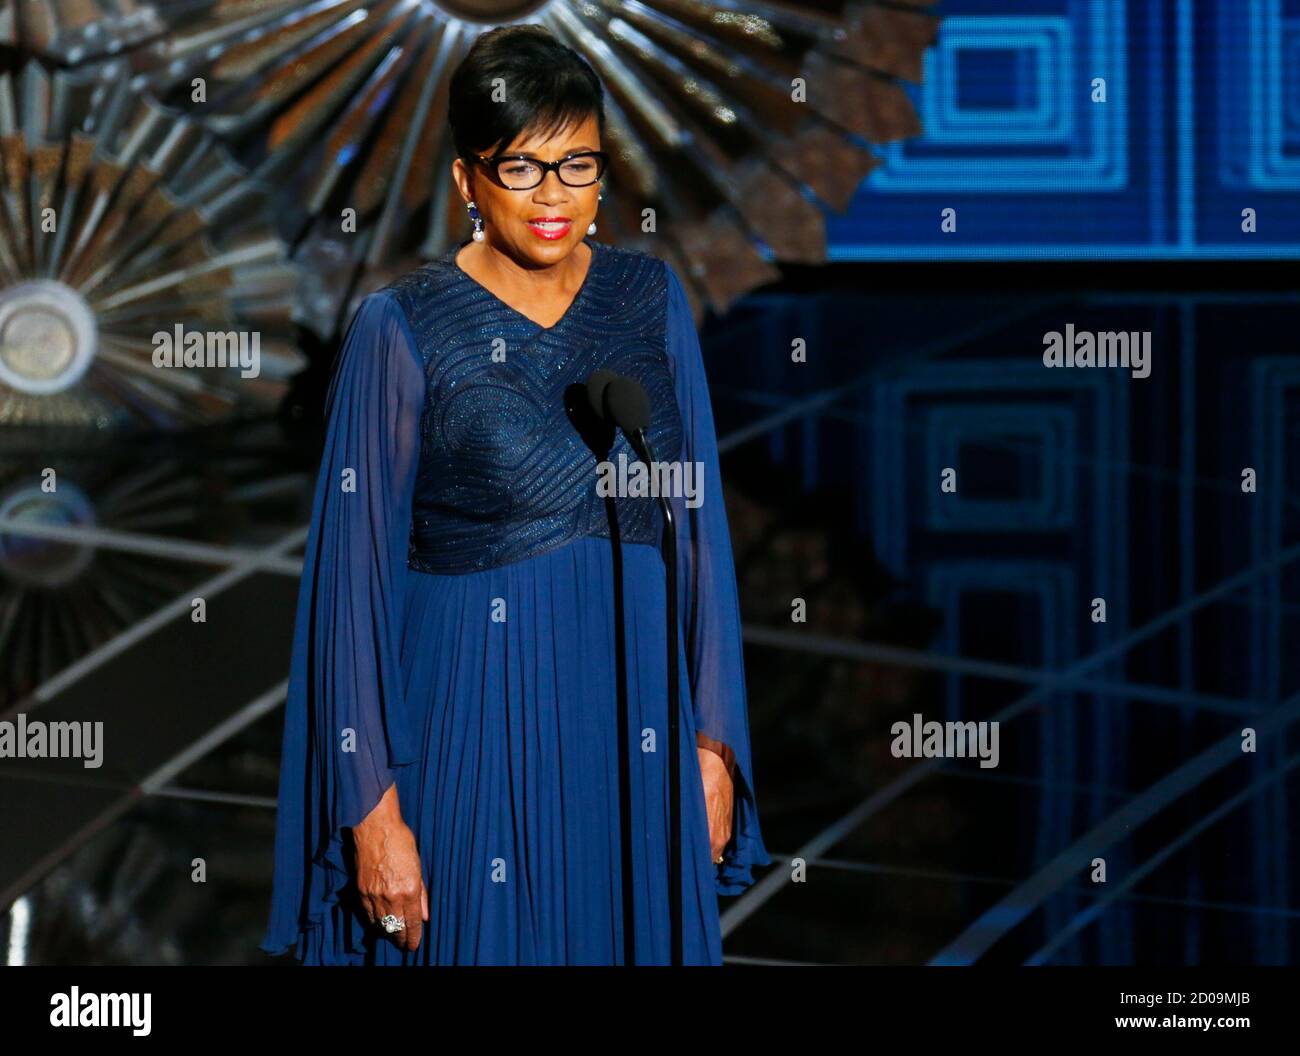 Cheryl Boone Isaacs, president of Academy of Motion Picture Arts and Sciences, speaks  at the 87th Academy Awards in Hollywood, California February 22, 2015. REUTERS/Mike Blake (UNITED STATES TAGS:ENTERTAINMENT) (OSCARS-SHOW) Stock Photo